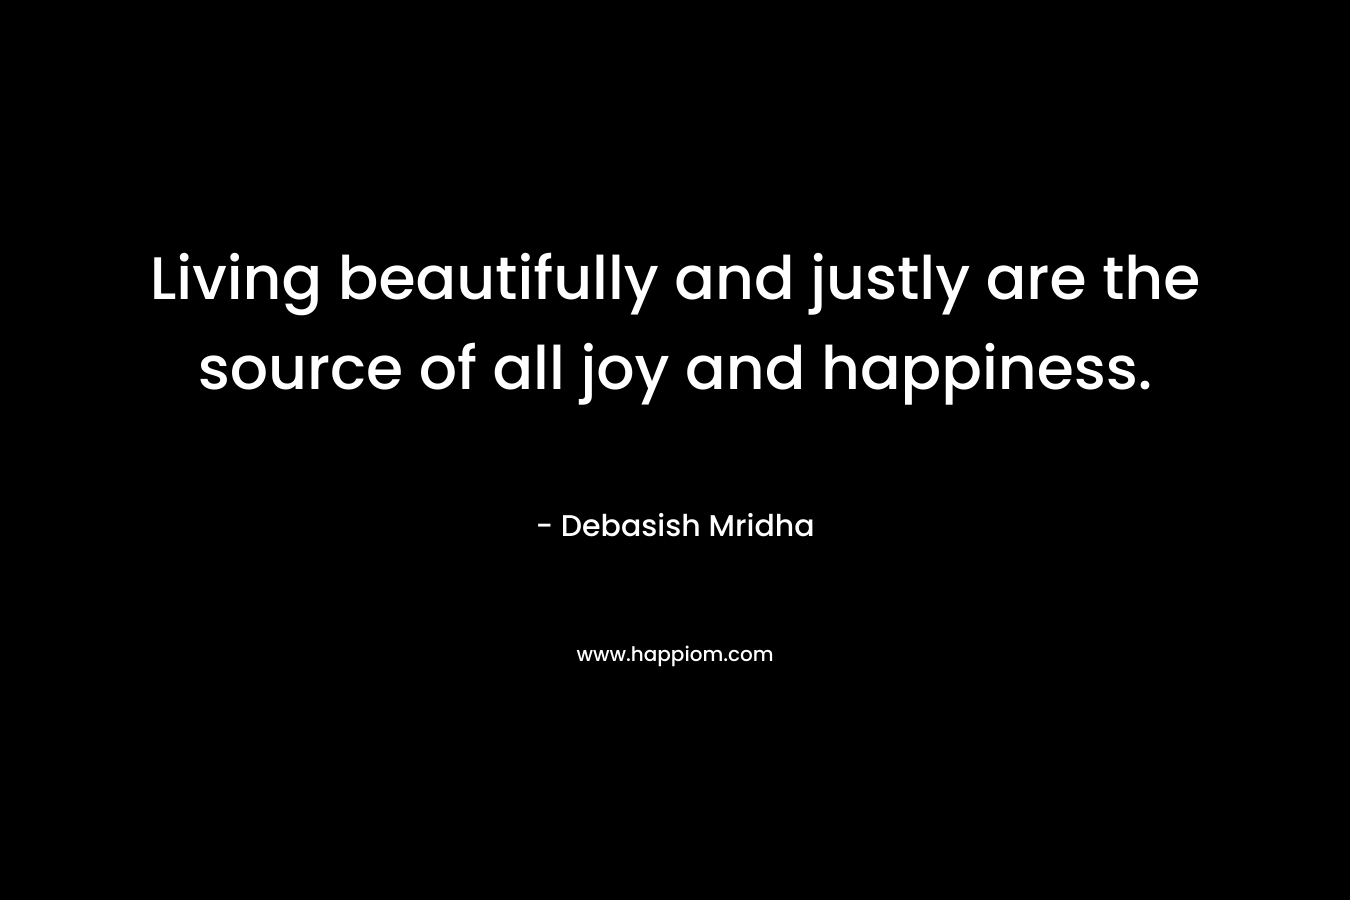 Living beautifully and justly are the source of all joy and happiness.